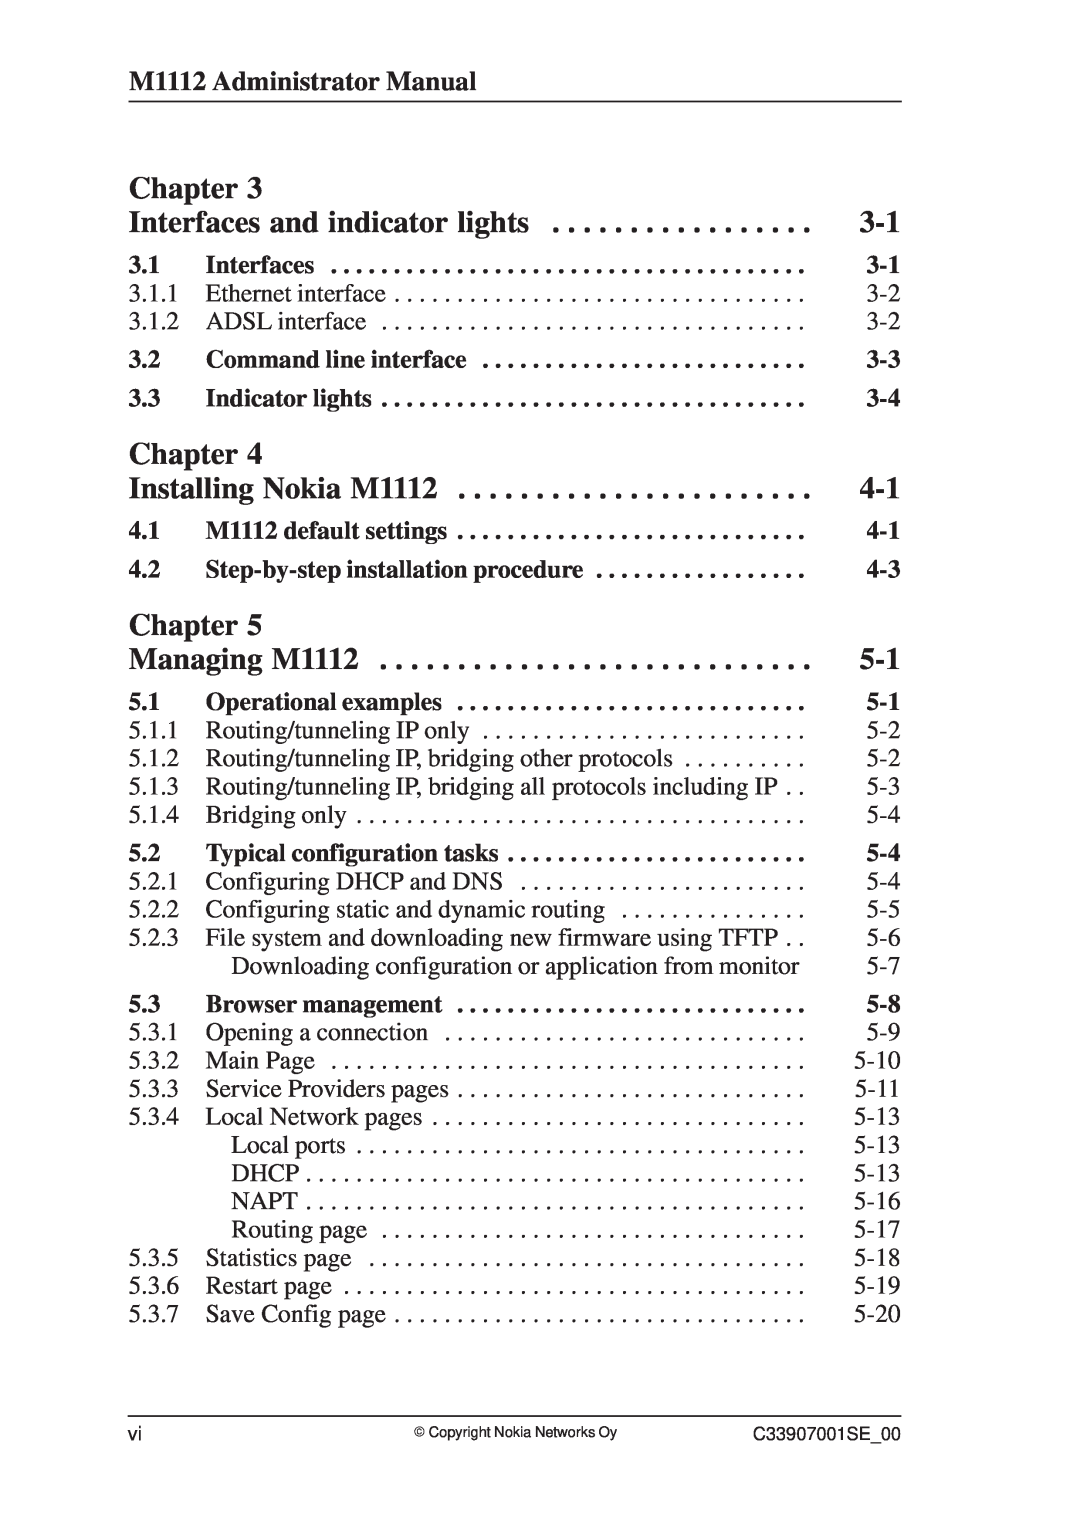 Nokia Interfaces and indicator lights, Installing Nokia M1112, Managing M1112, Chapter, M1112 Administrator Manual 